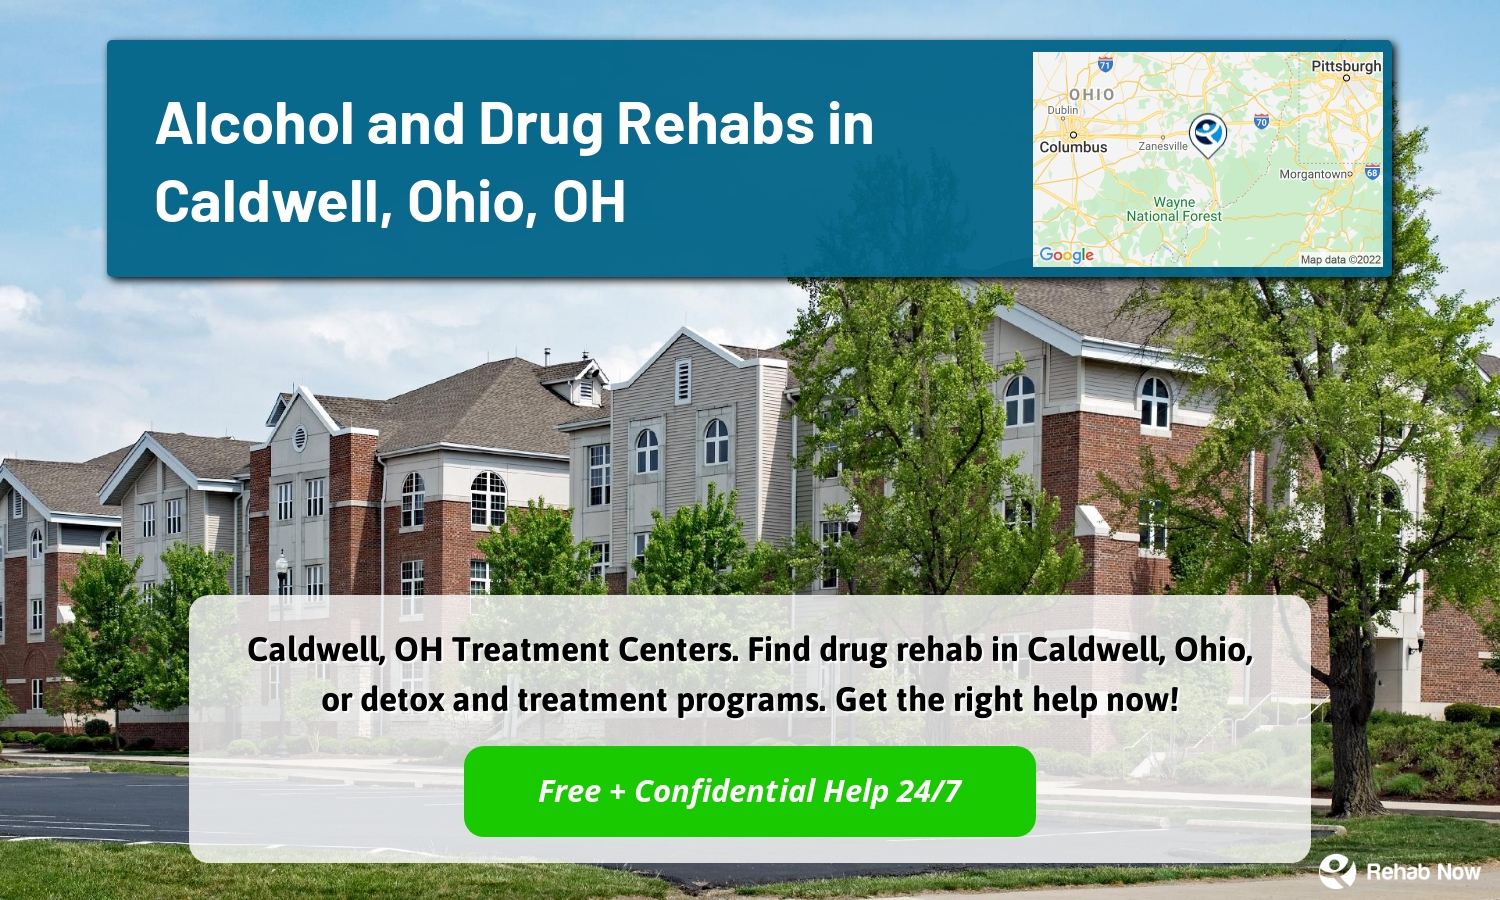 Caldwell, OH Treatment Centers. Find drug rehab in Caldwell, Ohio, or detox and treatment programs. Get the right help now!